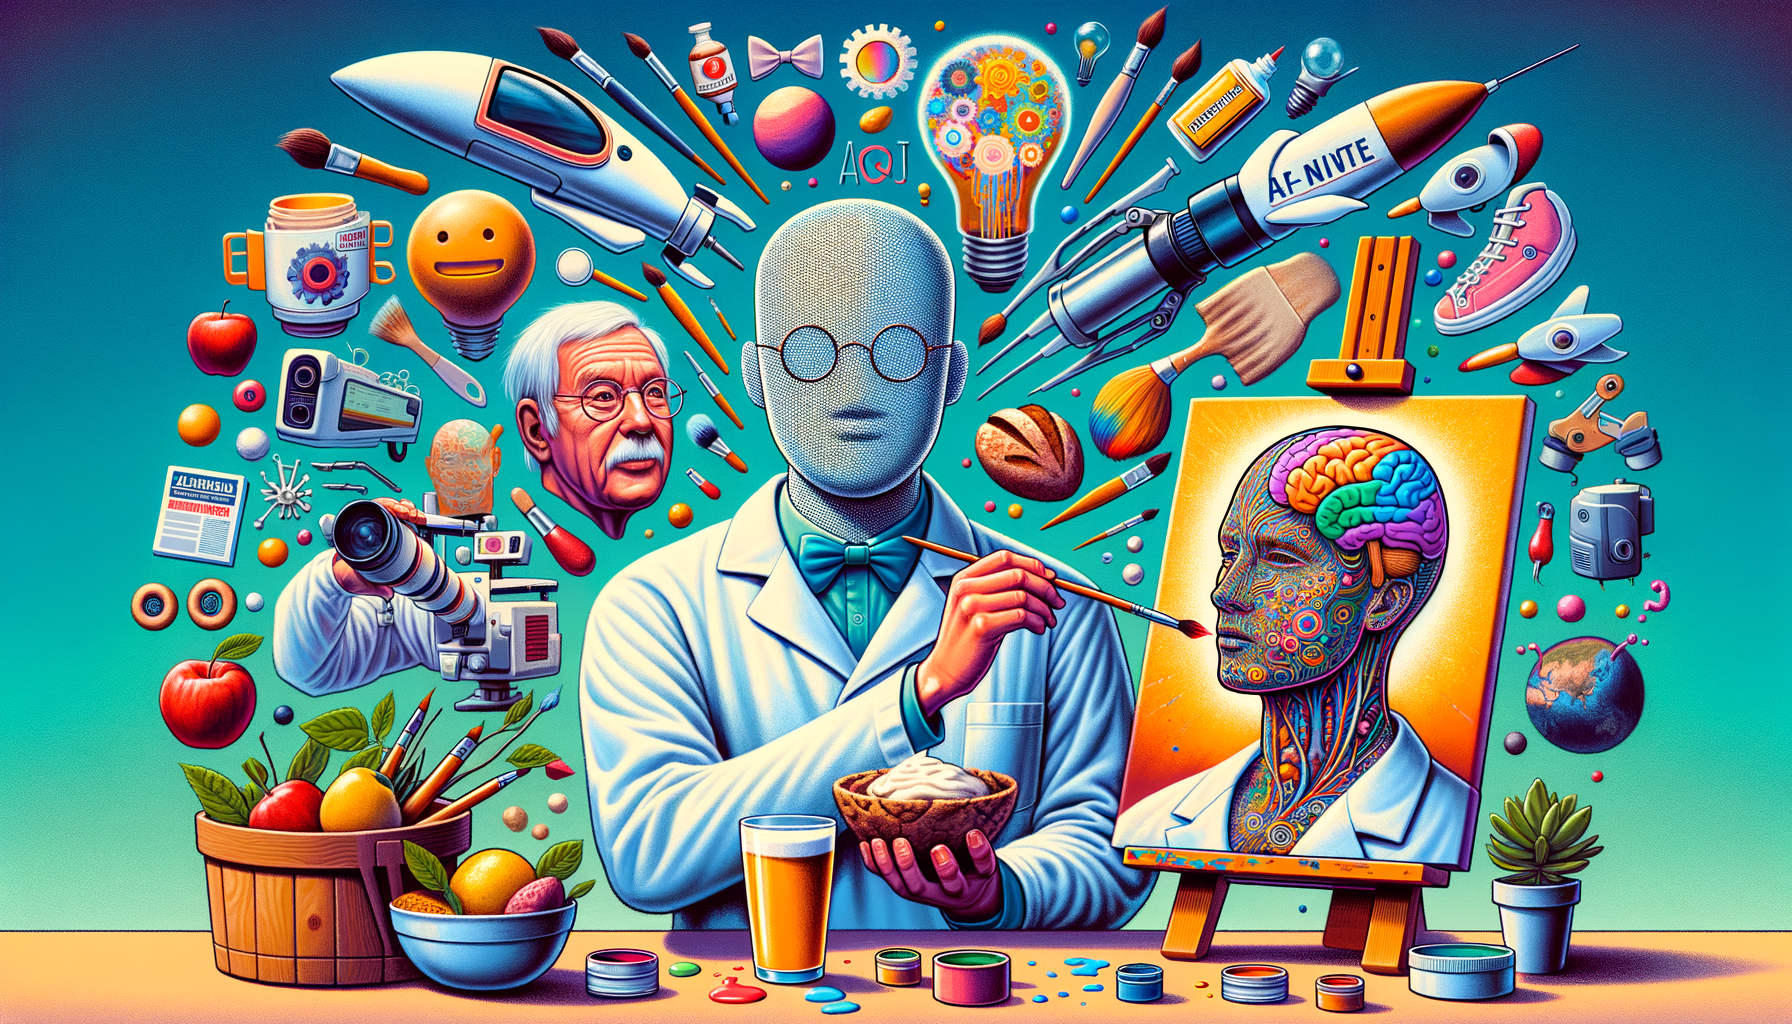 “Latest AI Breakthroughs: Art, Cooking, Healthcare & Climate Action!”